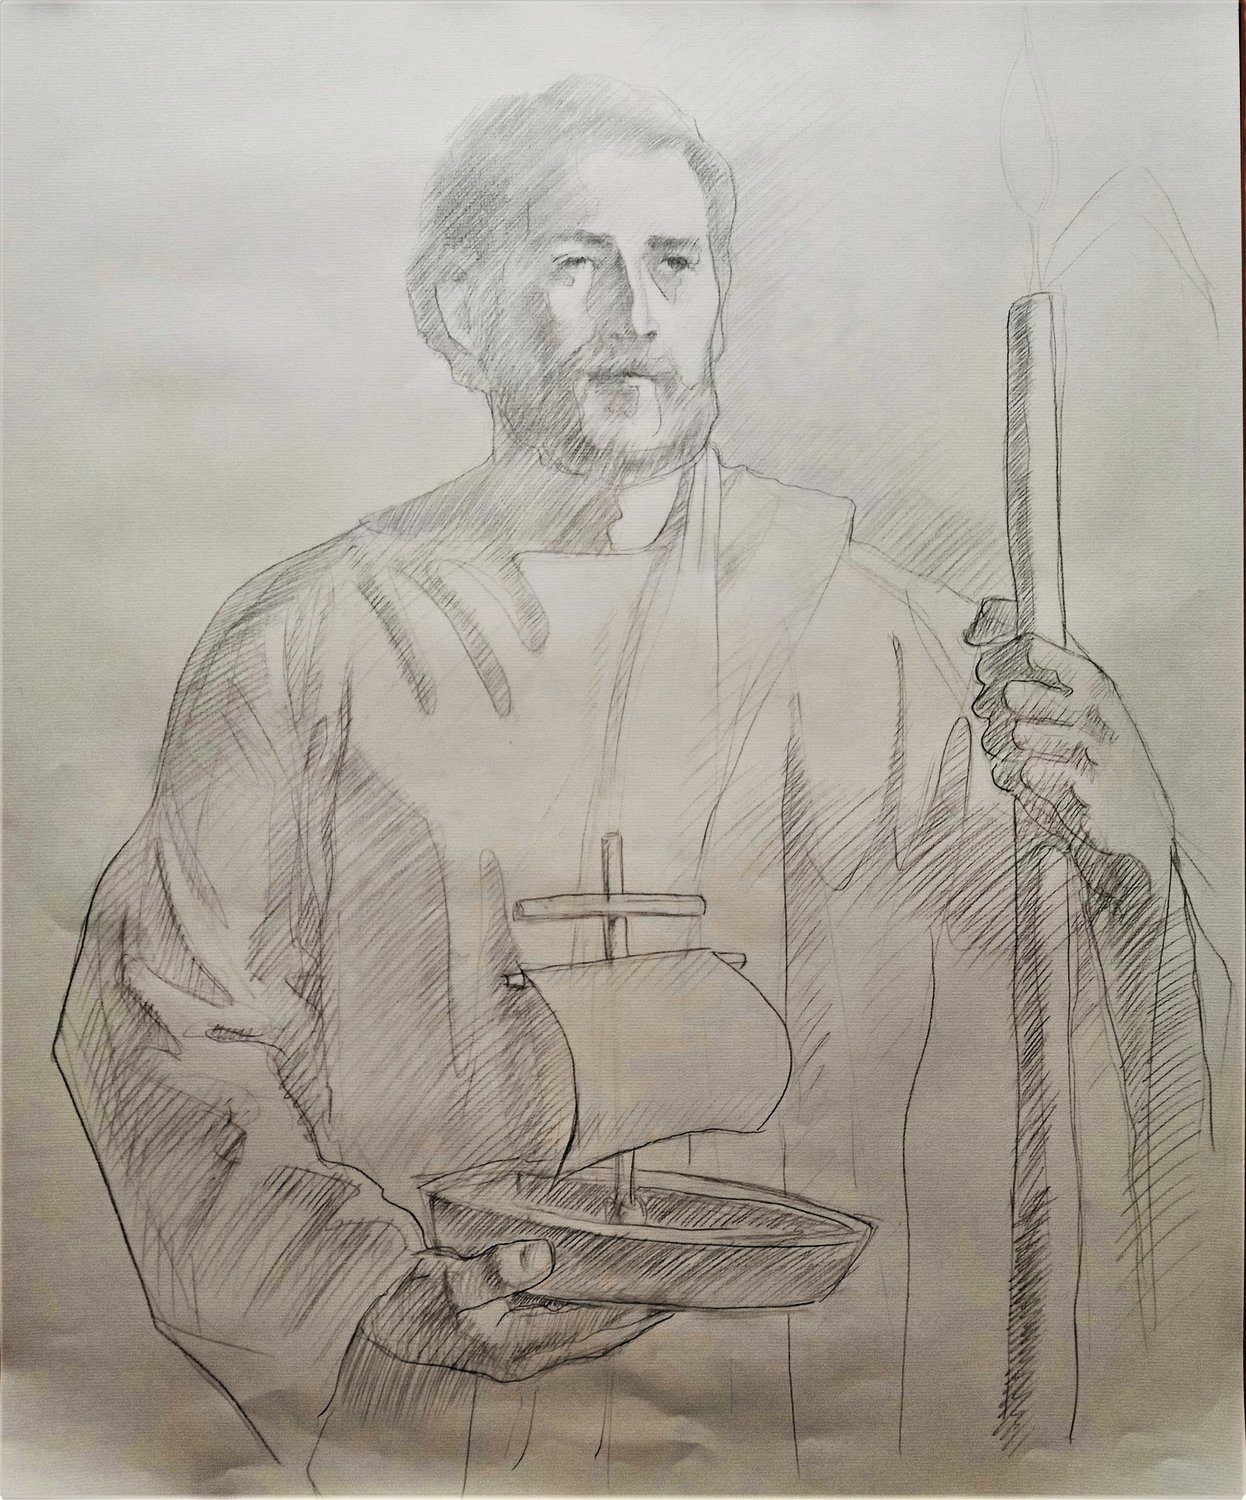 This image of St. Joseph will be used to create part of a bronze relief tympanum over the entrance to the Cathedral of St. Joseph in Jefferson City.